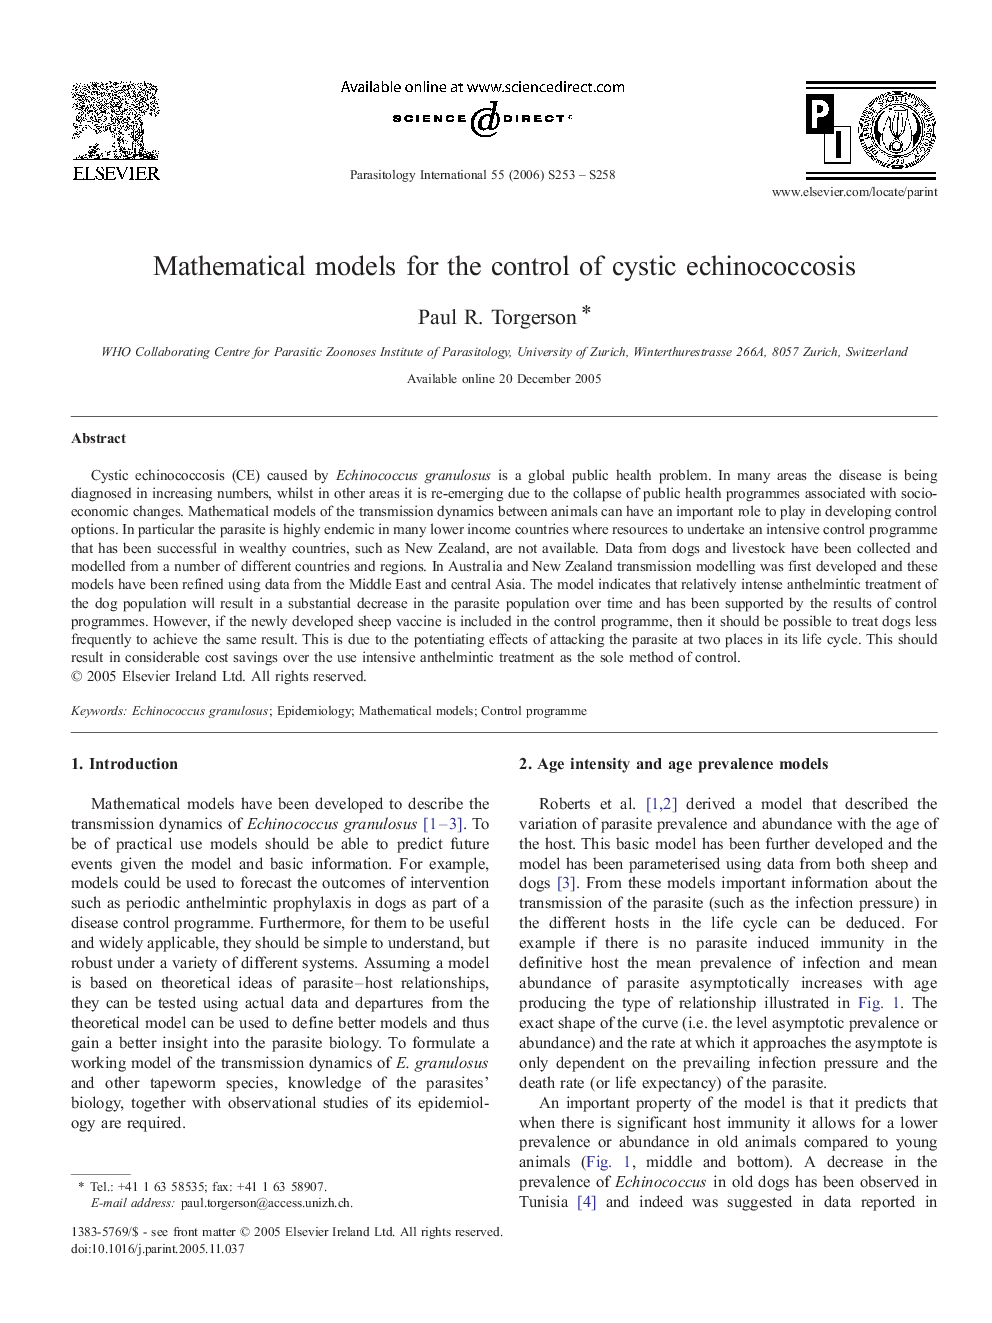 Mathematical models for the control of cystic echinococcosis